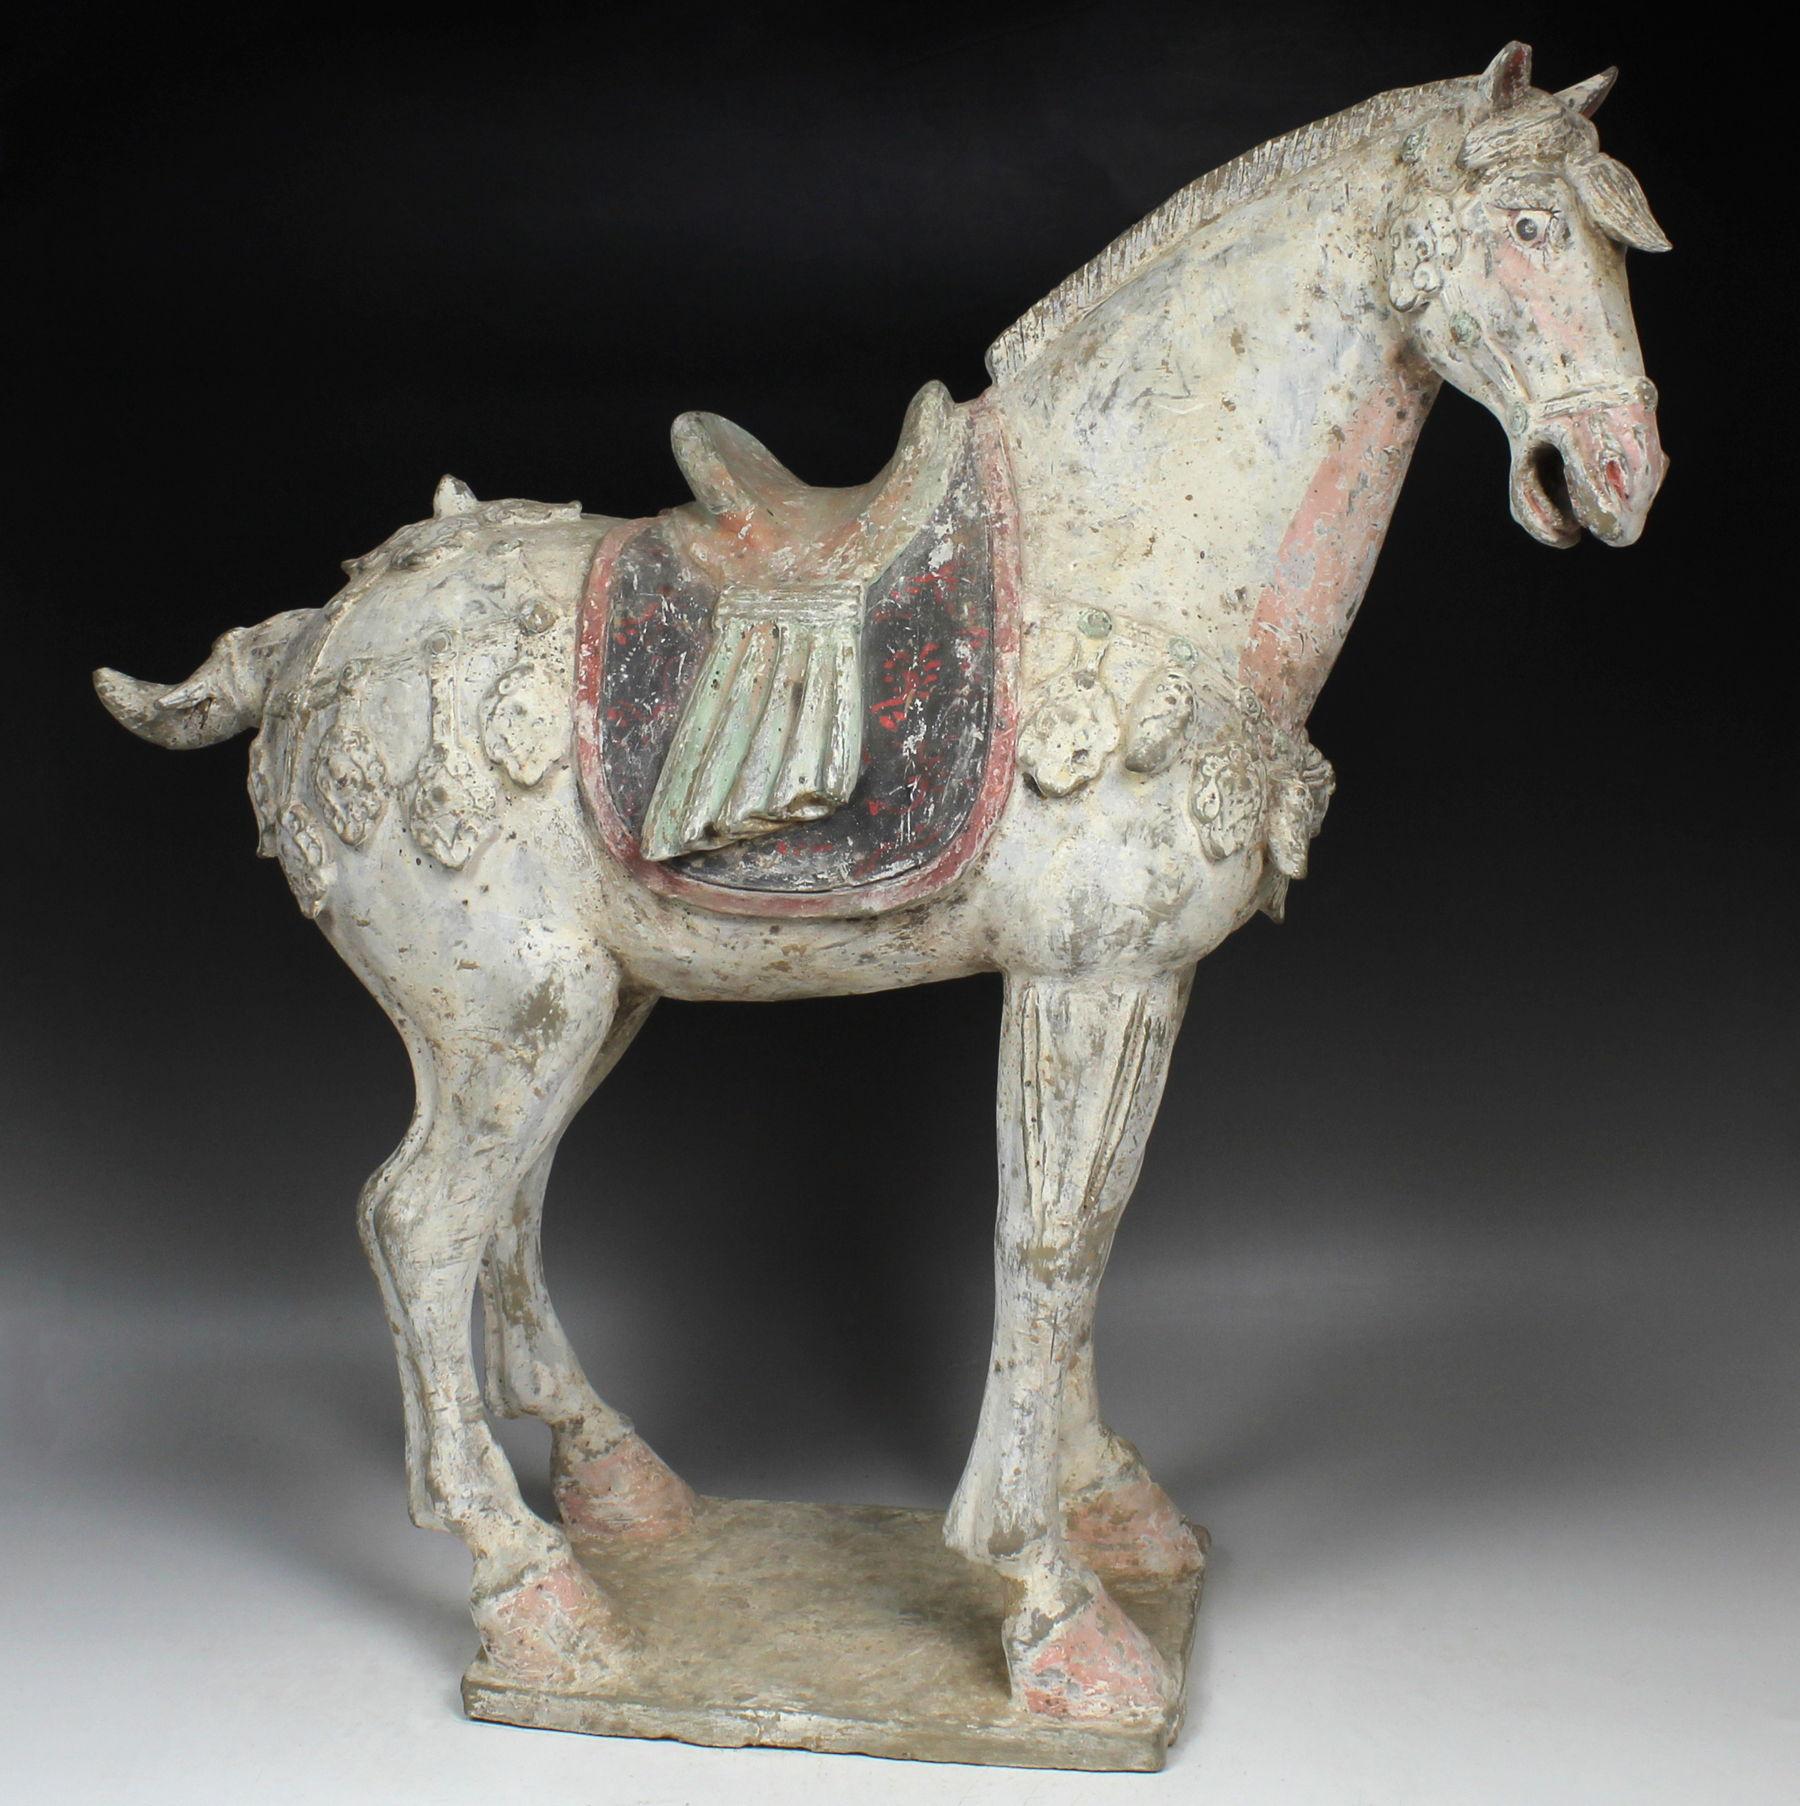 ITEM: Statuette of a horse
MATERIAL: Pottery
CULTURE: Chinese, Tang Dynasty
PERIOD: 618 – 907 A.D
DIMENSIONS: 560 mm x 530 mm x 200 mm
CONDITION: Good condition. Includes Thermoluminescence test by Laboratory Kotalla (Reference